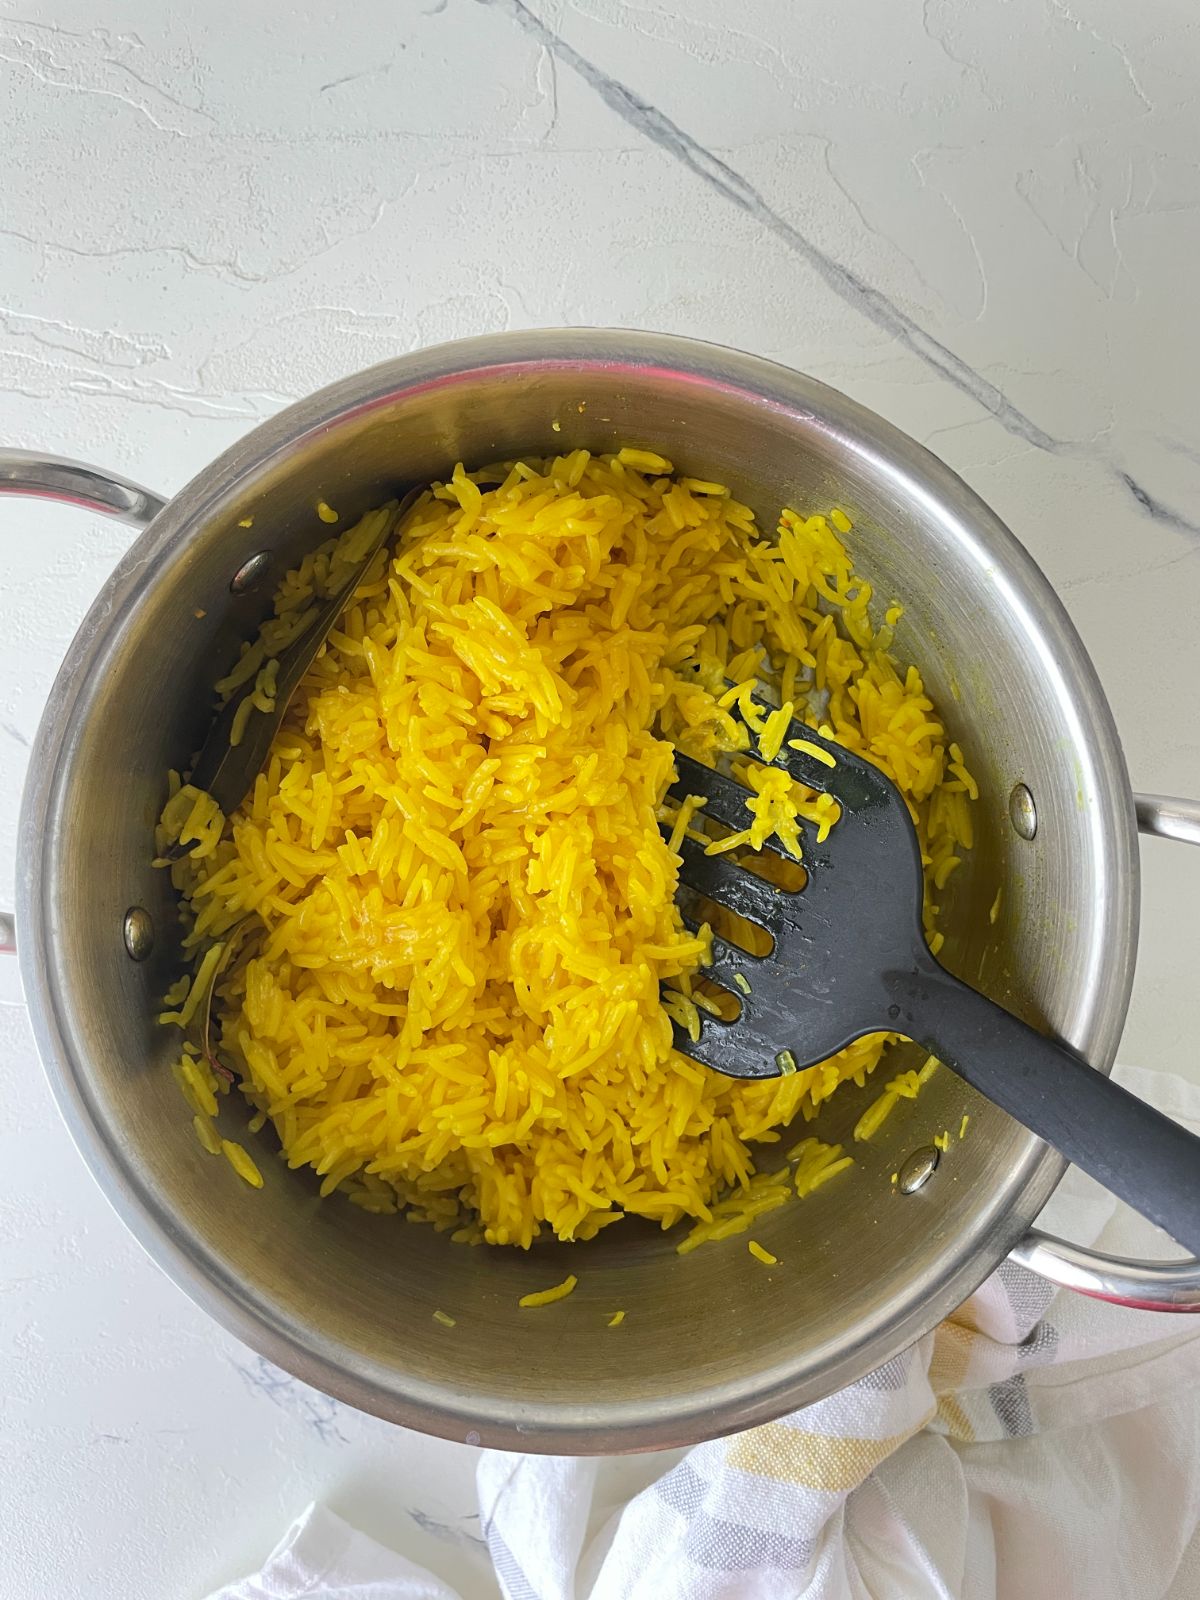 garlic turmeric rice being cooked in a pot